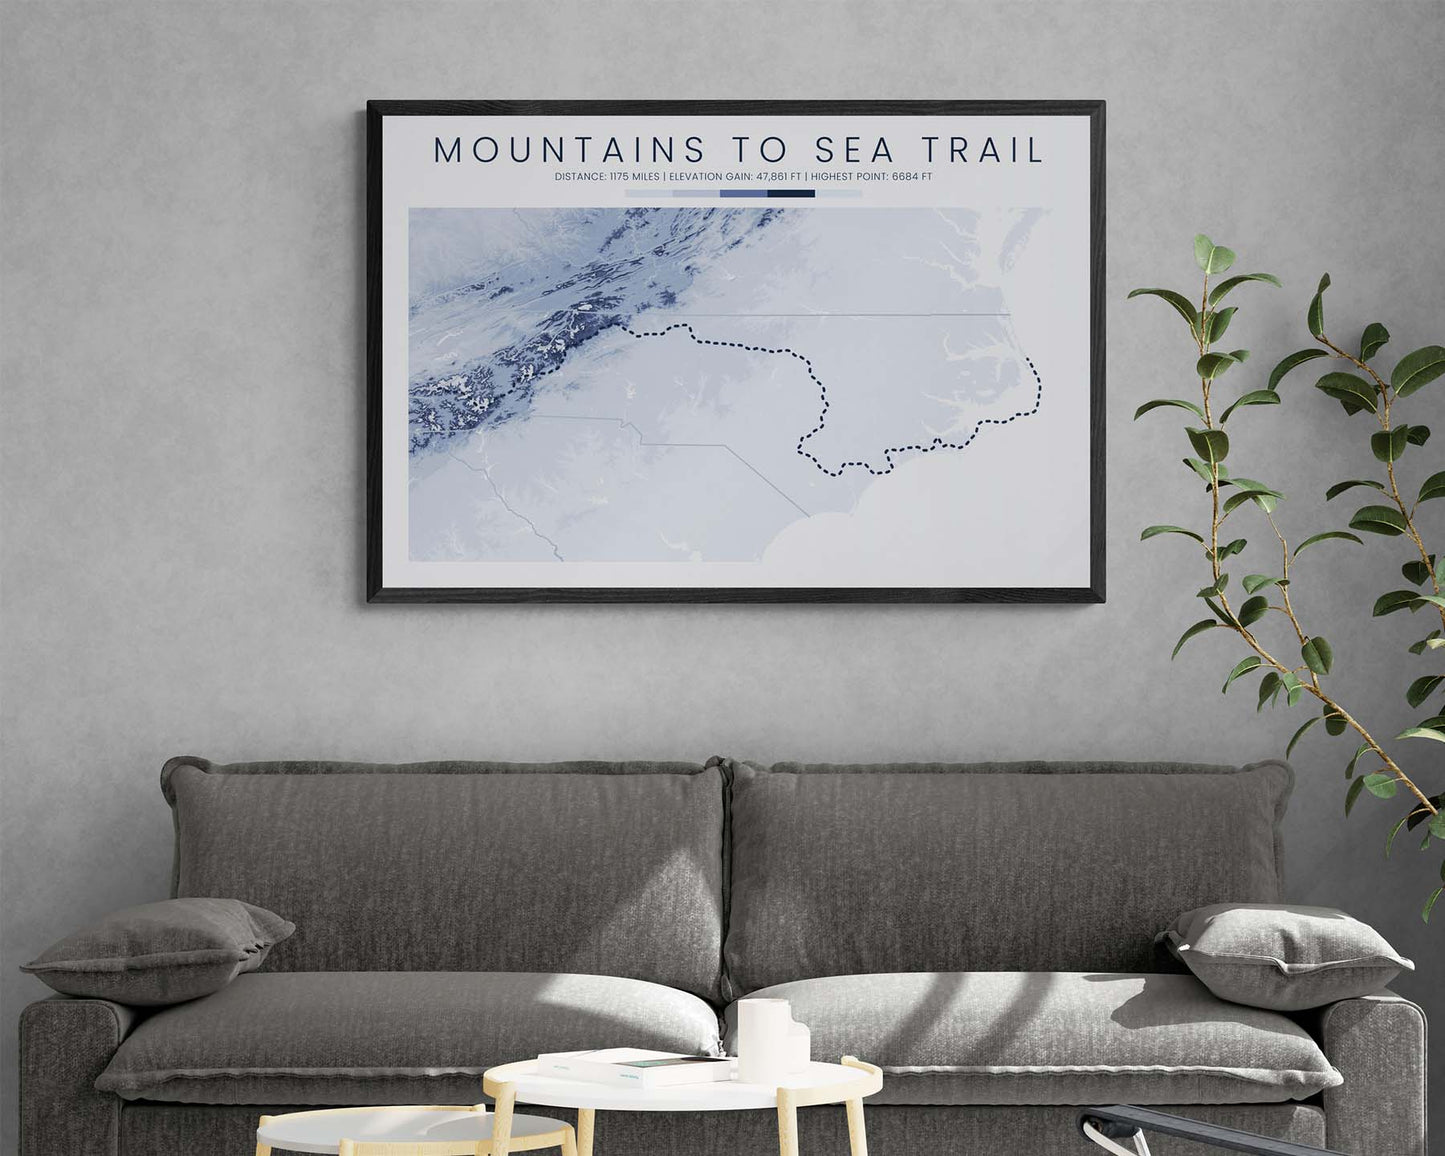 MST (United States) Trek Art with Shaded Relief Map in Modern Living Room Decor